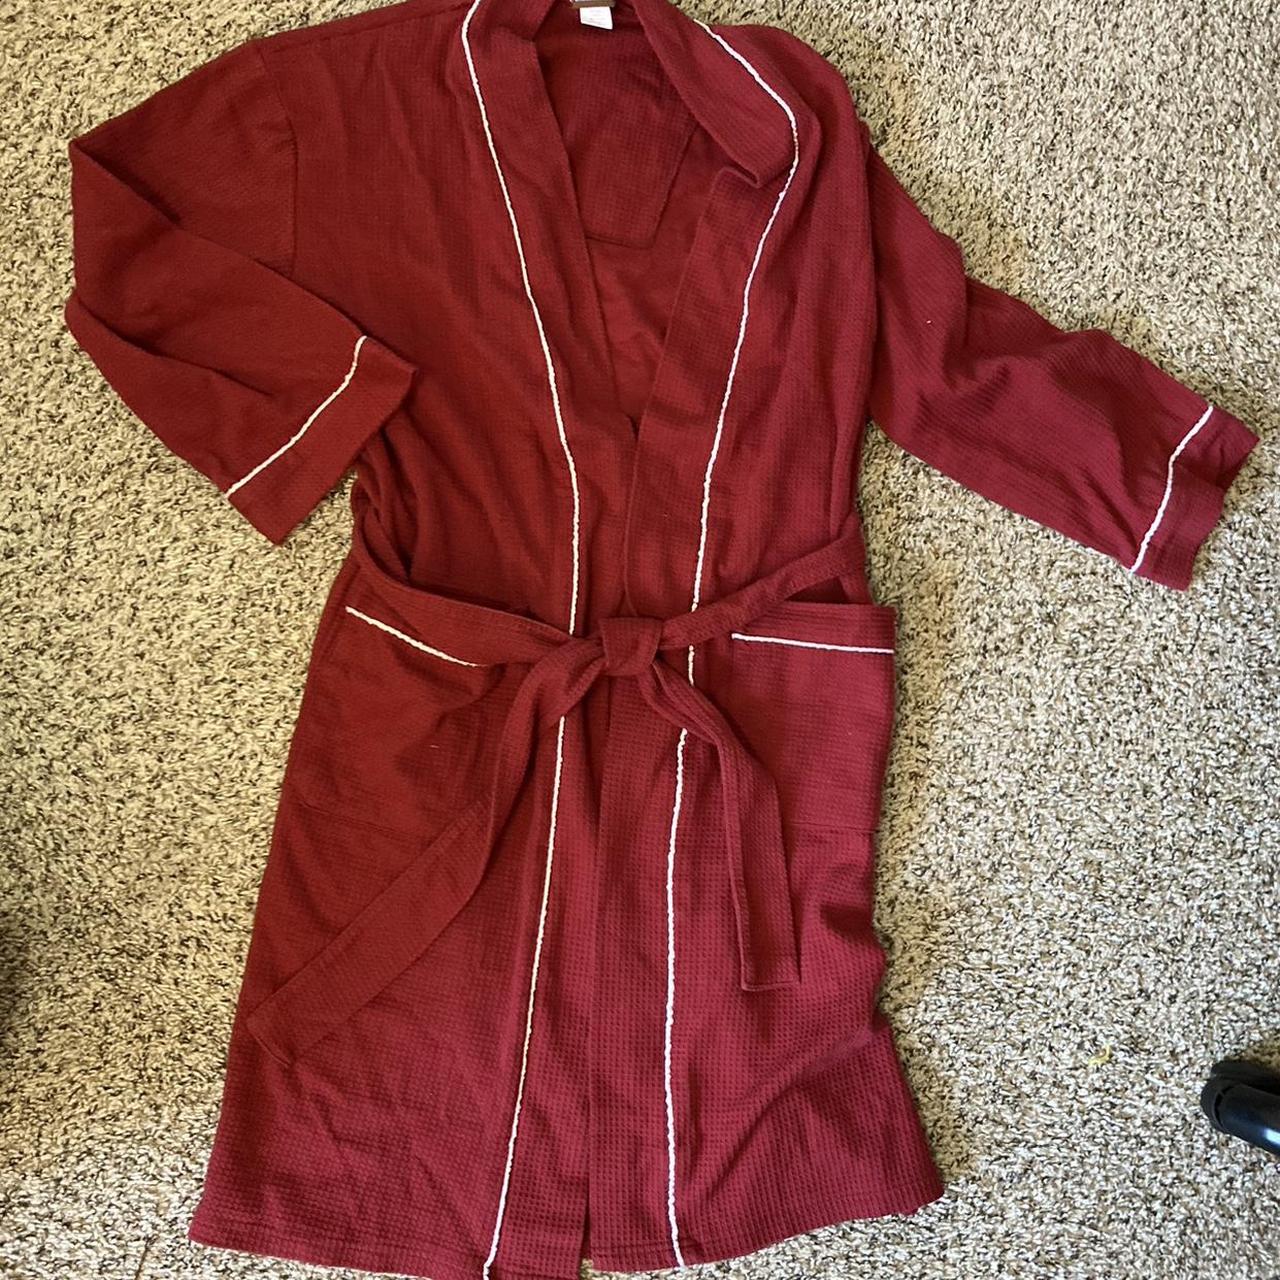 item listed by optimalthriftle